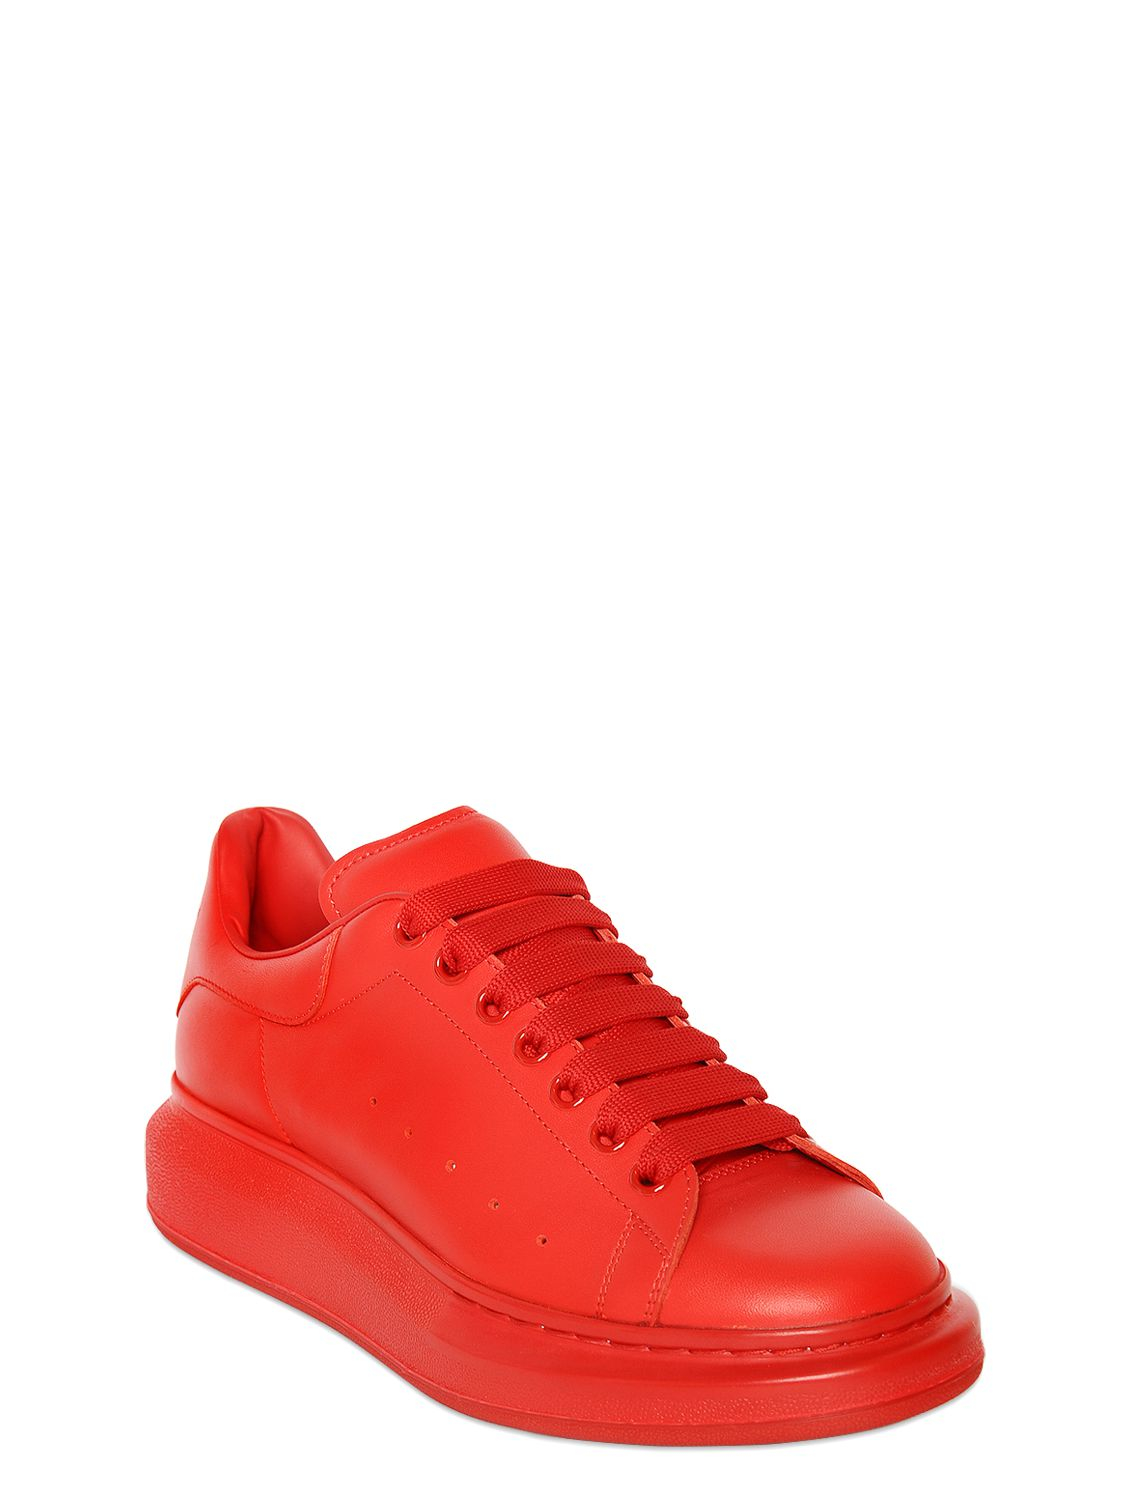 Alexander mcqueen Exaggerated-sole Leather Sneakers in Red for Men | Lyst